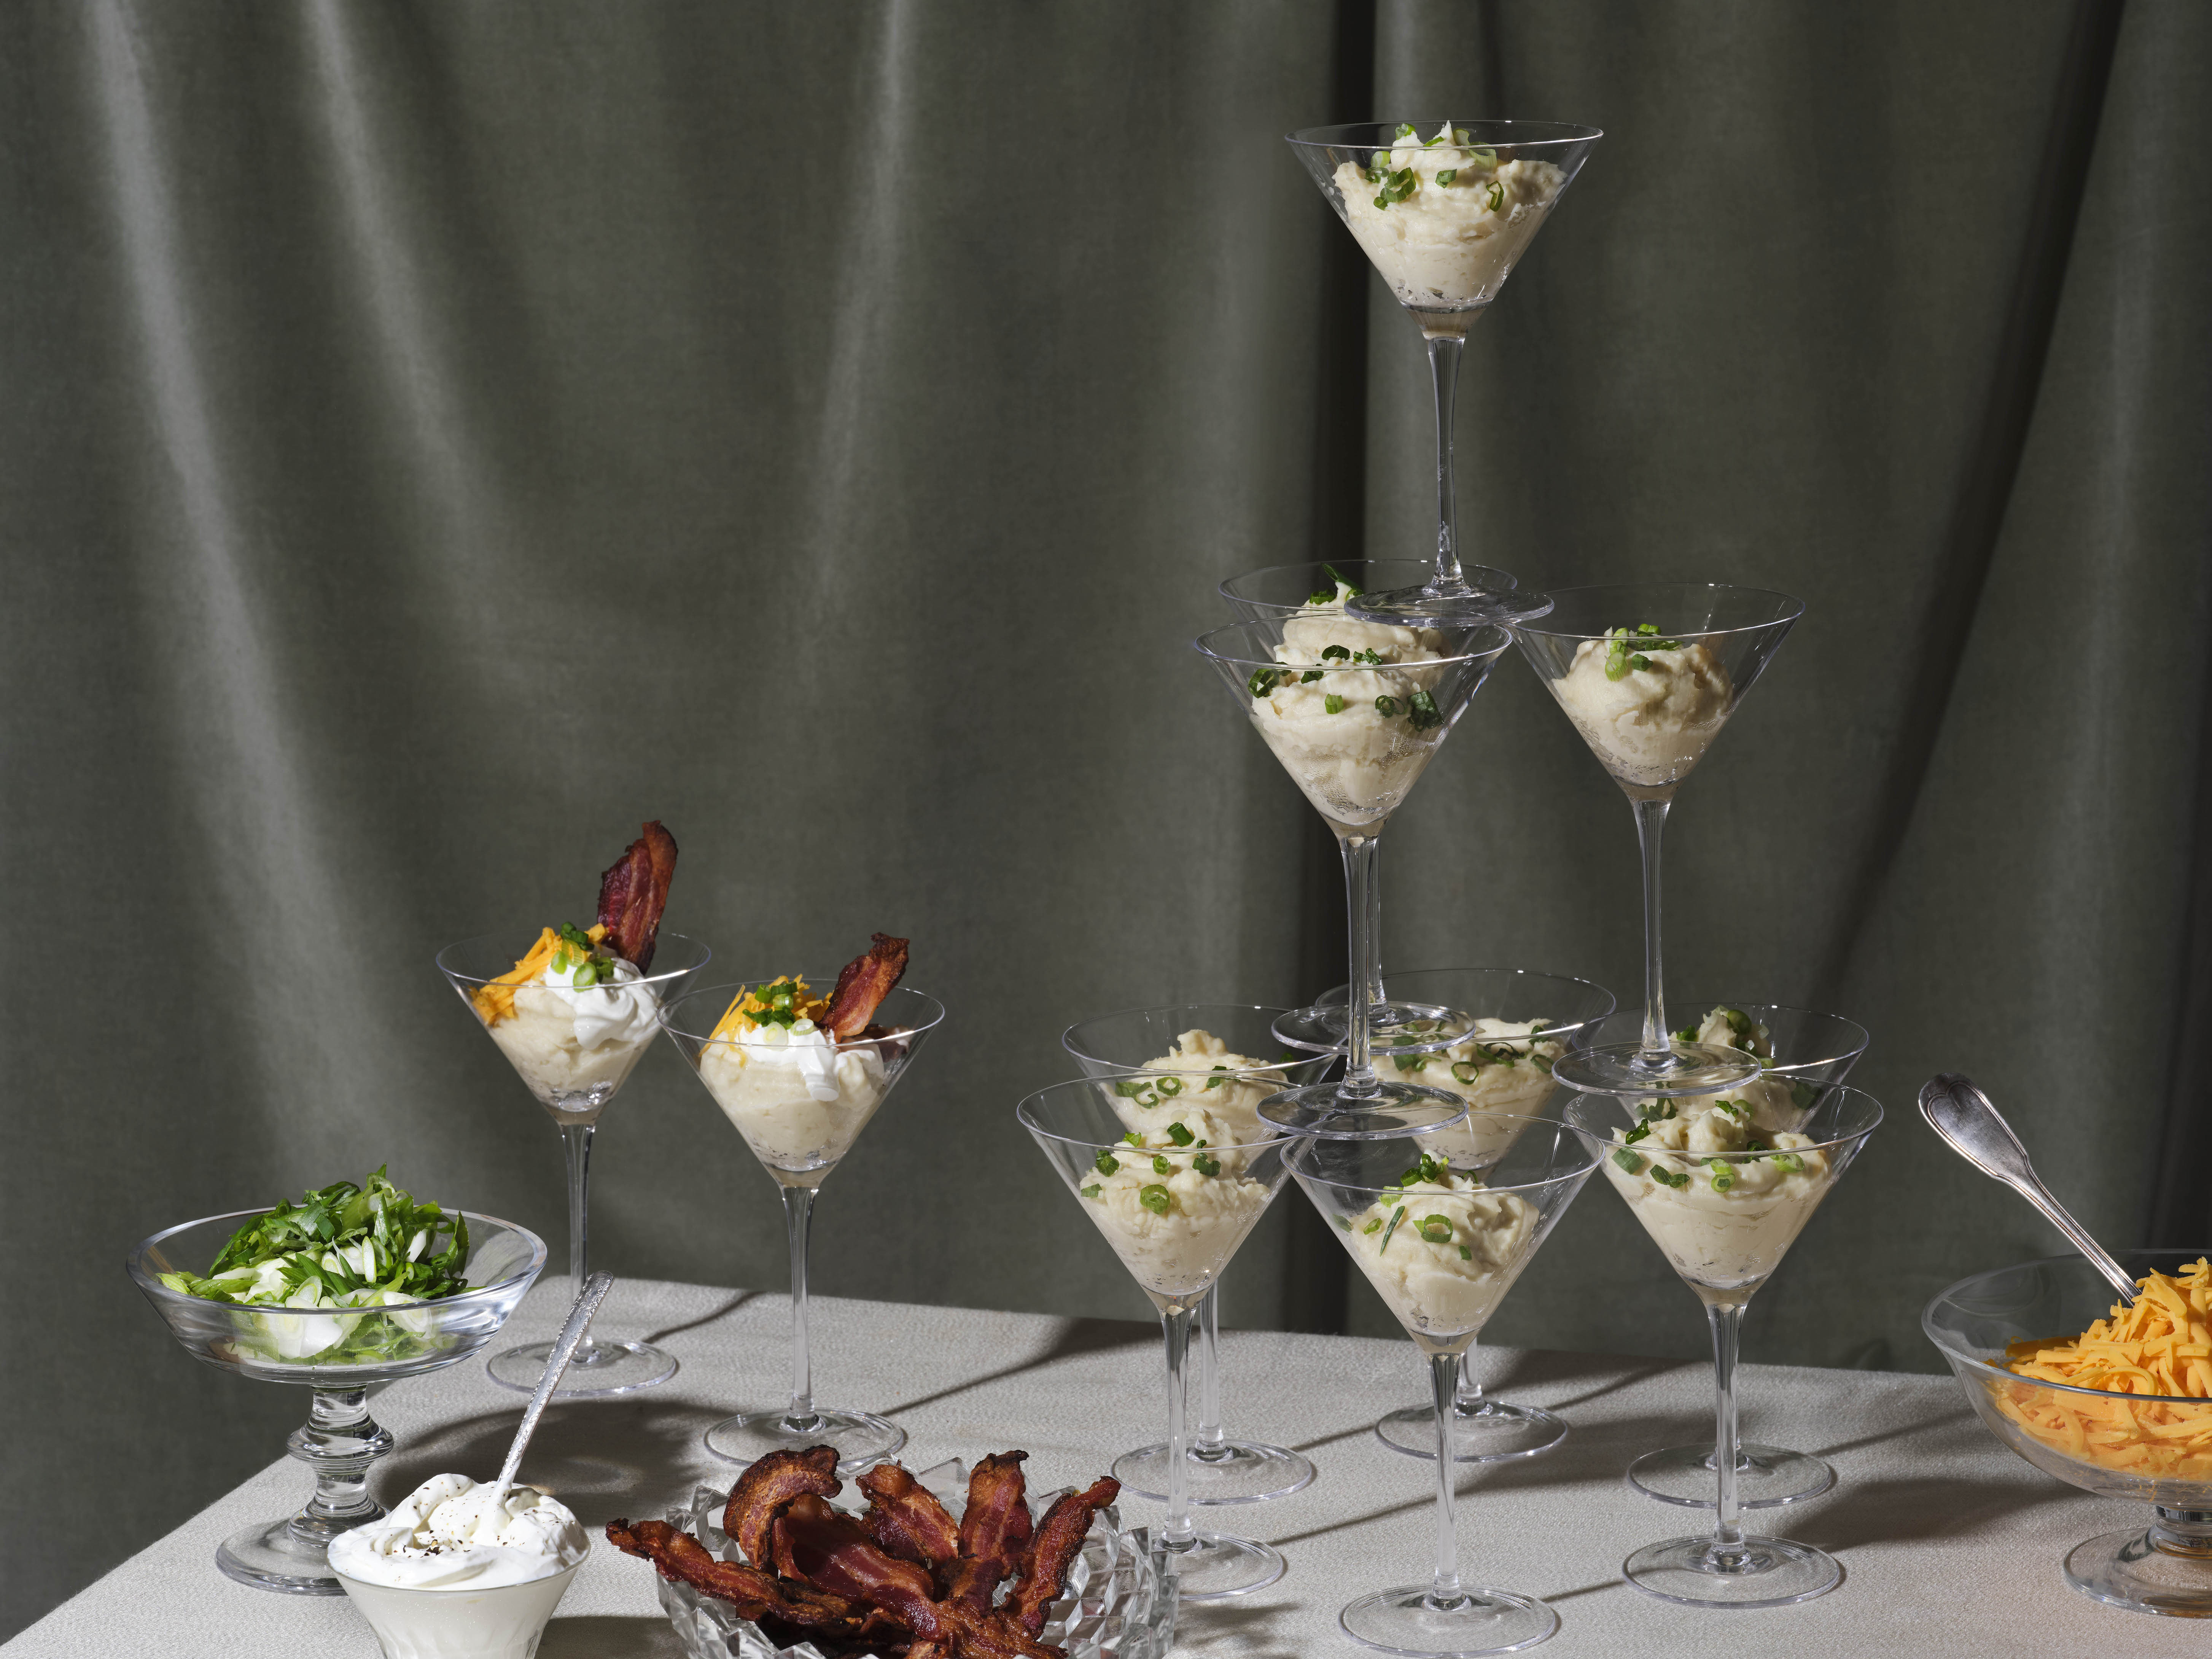 A tower of martini glasses filled with mashed potatoes topped with chives alongside a serving bowls filled with bacon, cheese, and sour cream.